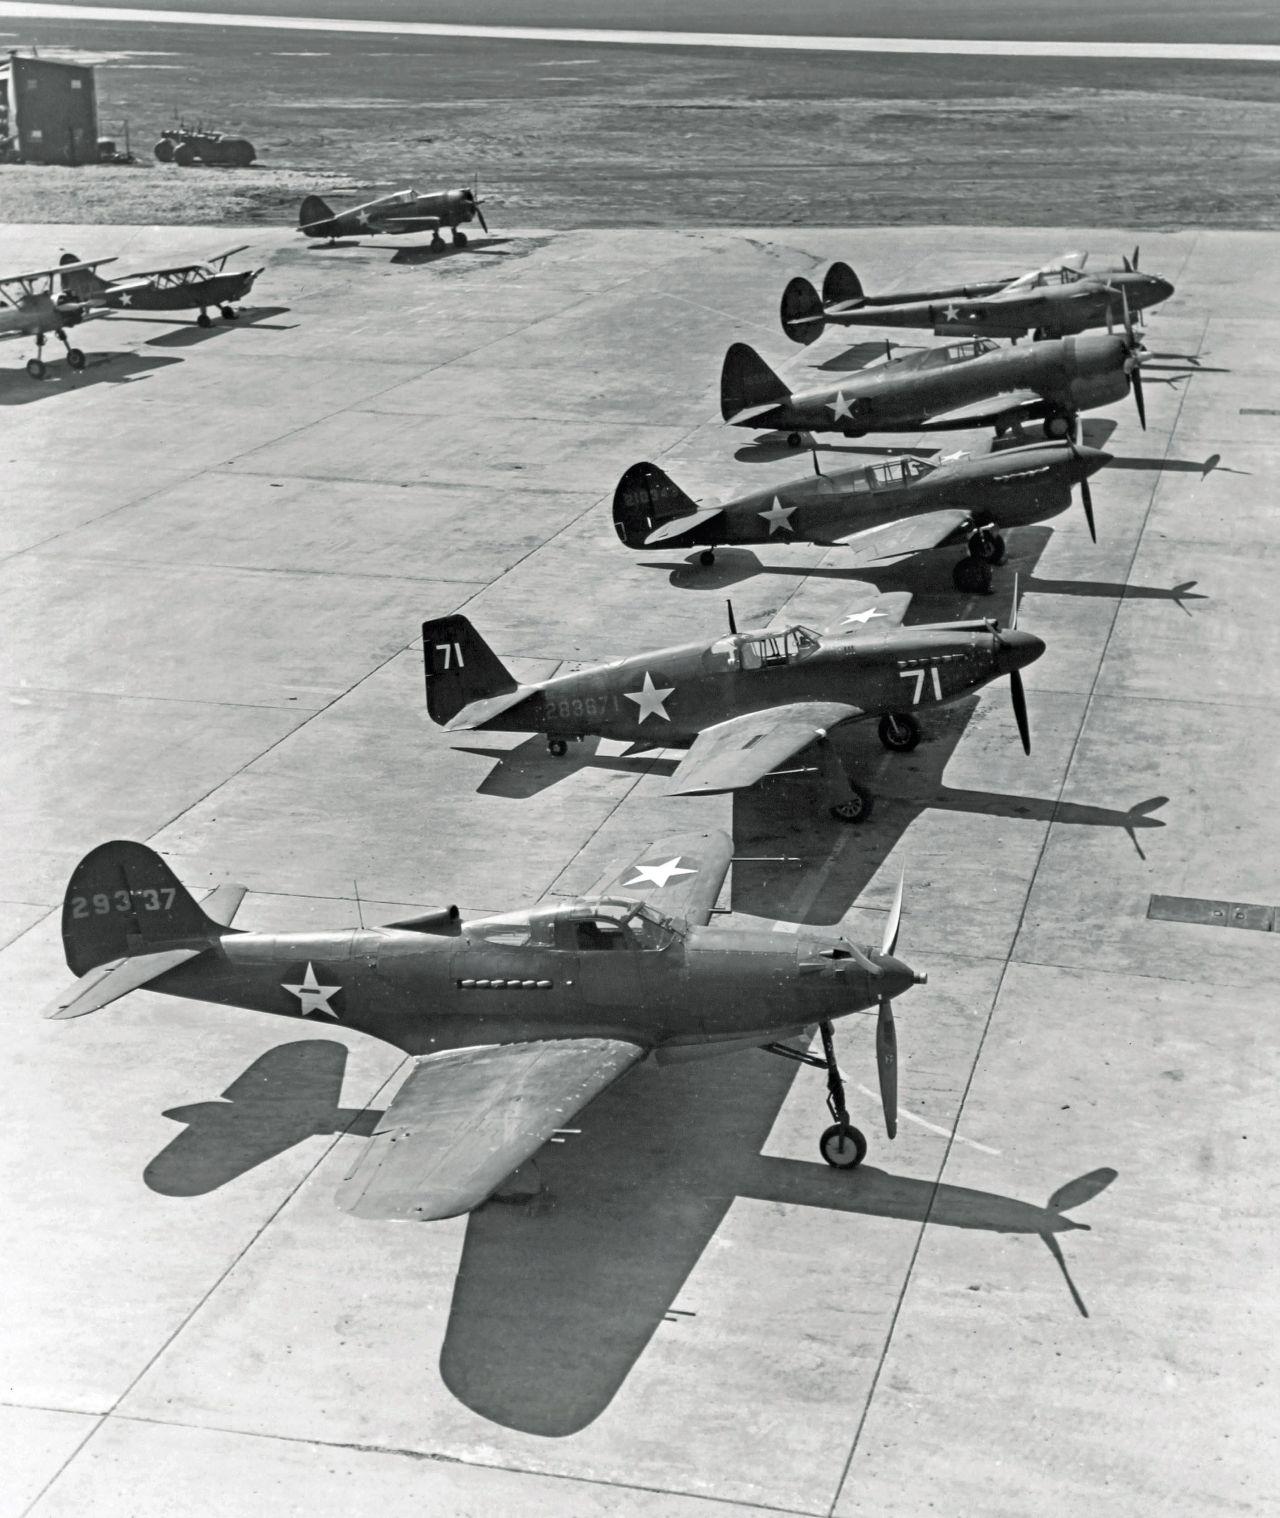 North American A-36A, White 71, s/n 42-83671 among other US fighters of the WW2 (3)